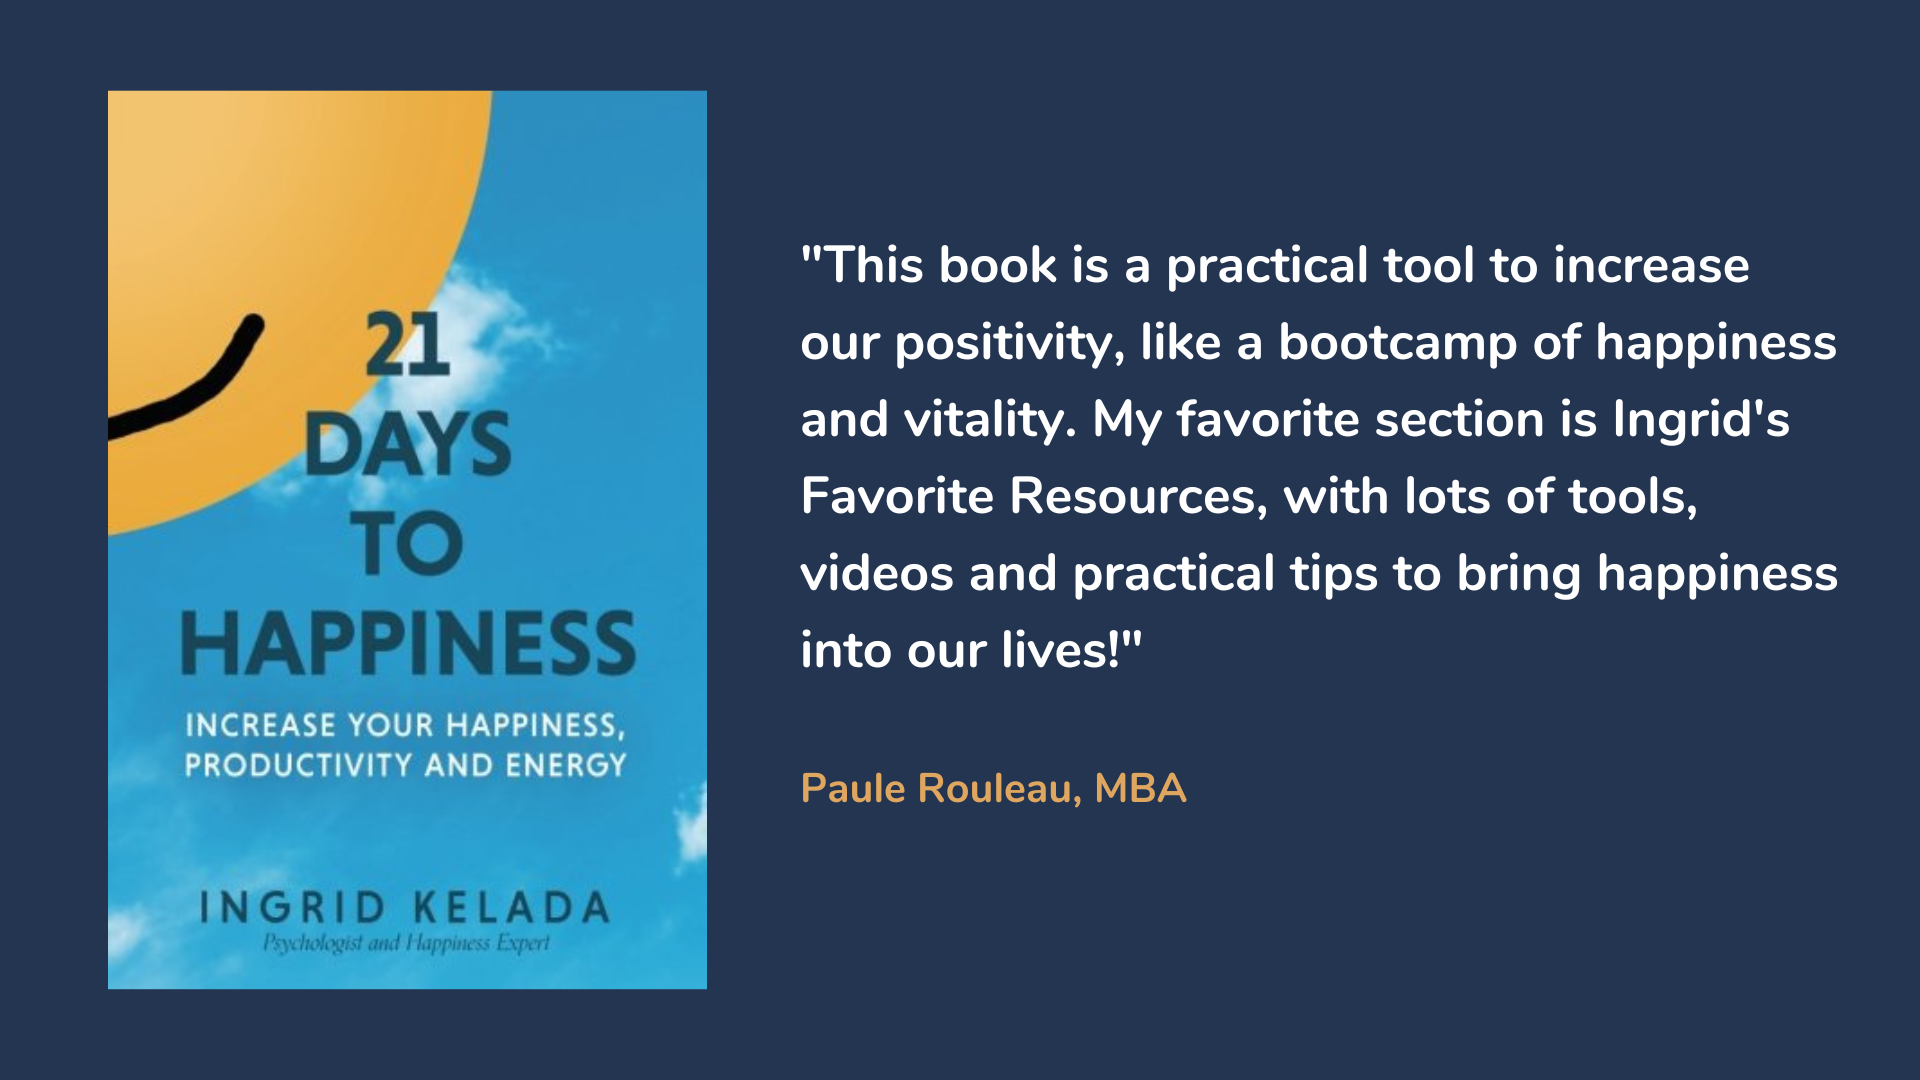 21 Days to Happiness: Increase Your Happiness, Productivity and Energy, book cover